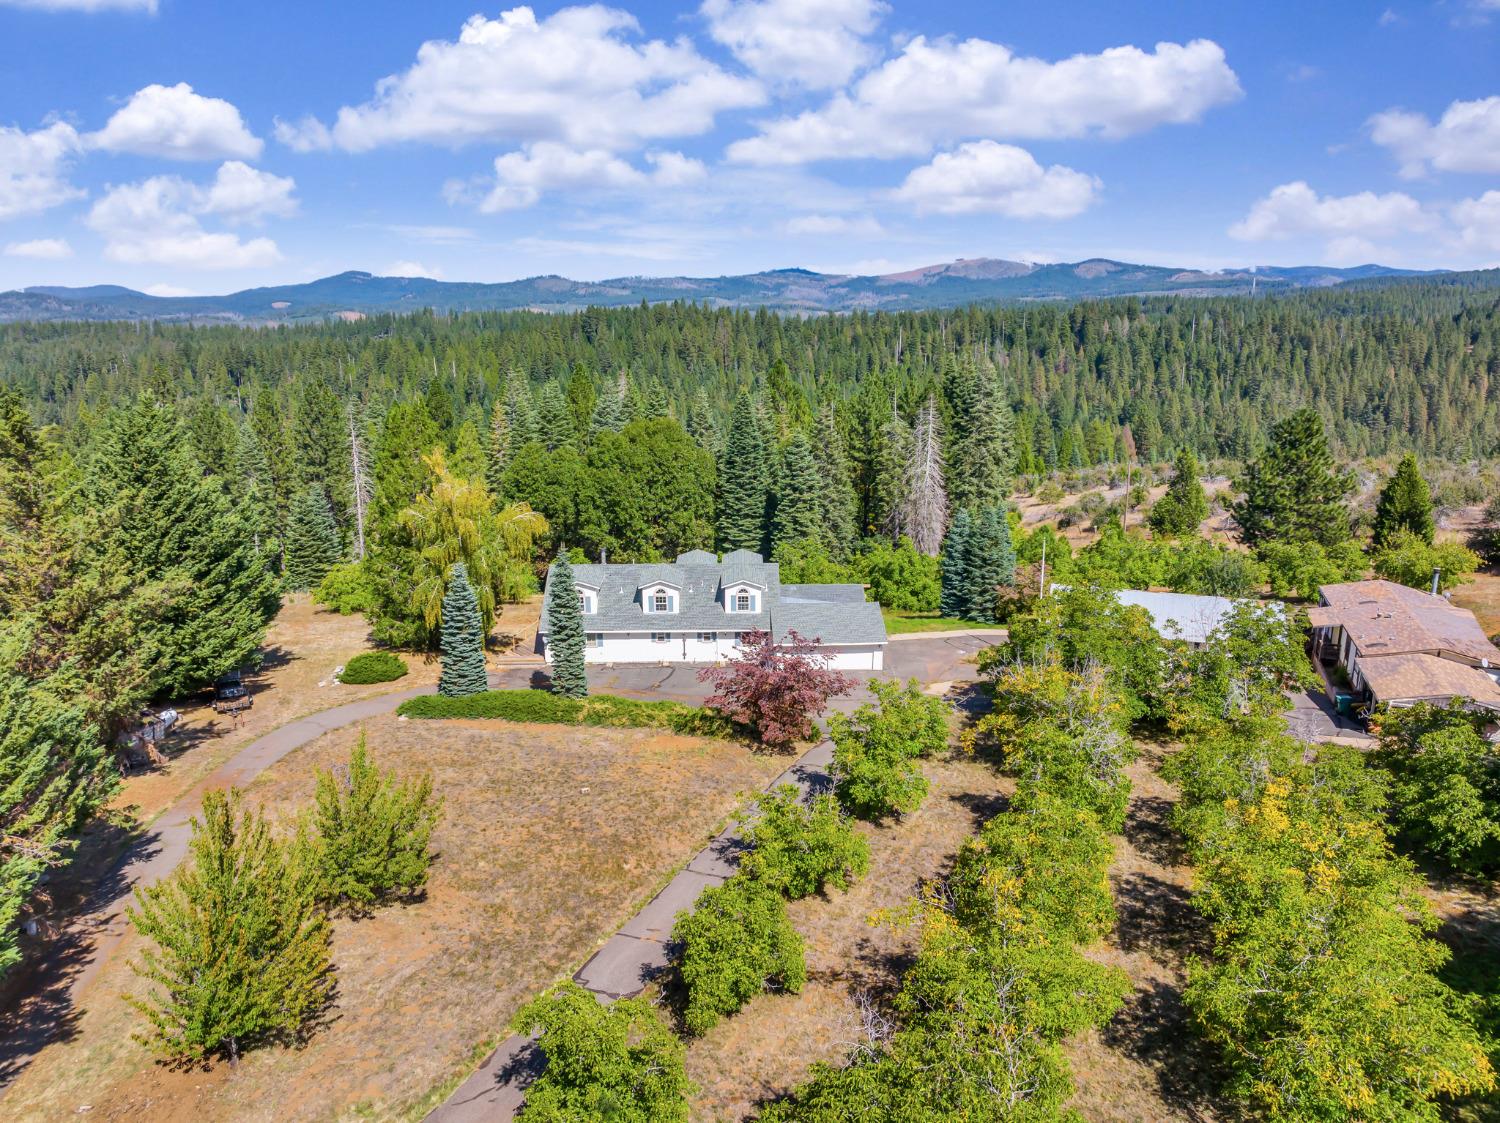 Photo of 2685 Mace Rd in Camino, CA